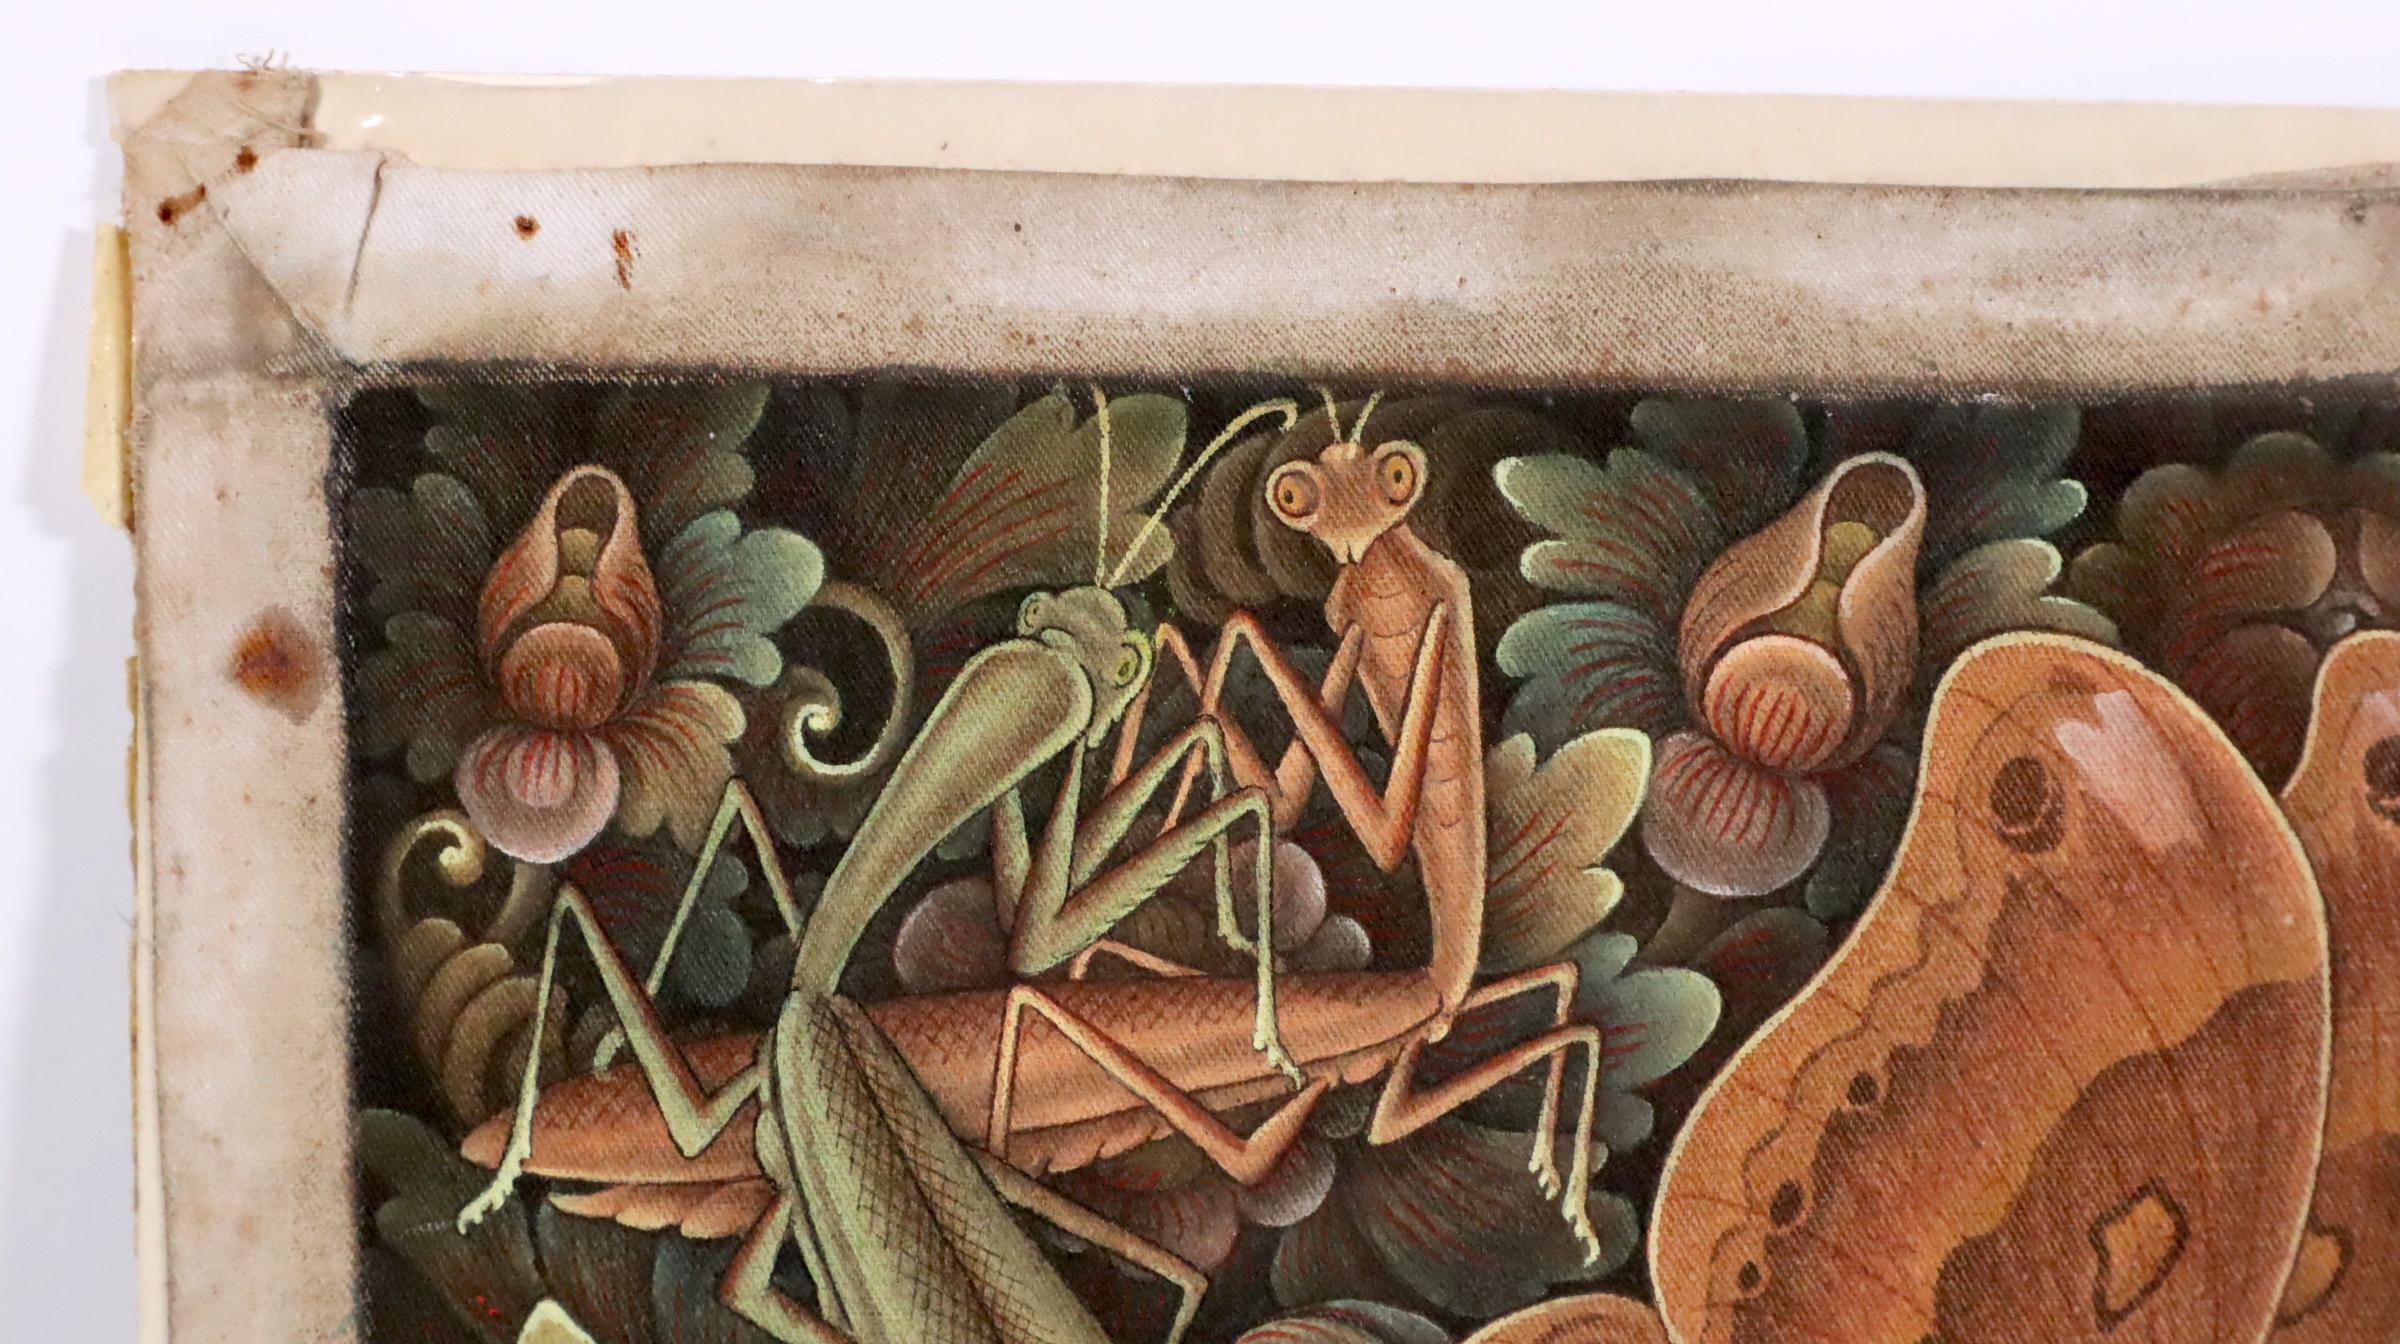 Balinese painting of the insect world Indonesian art from Peliatan Ubud Bali 2